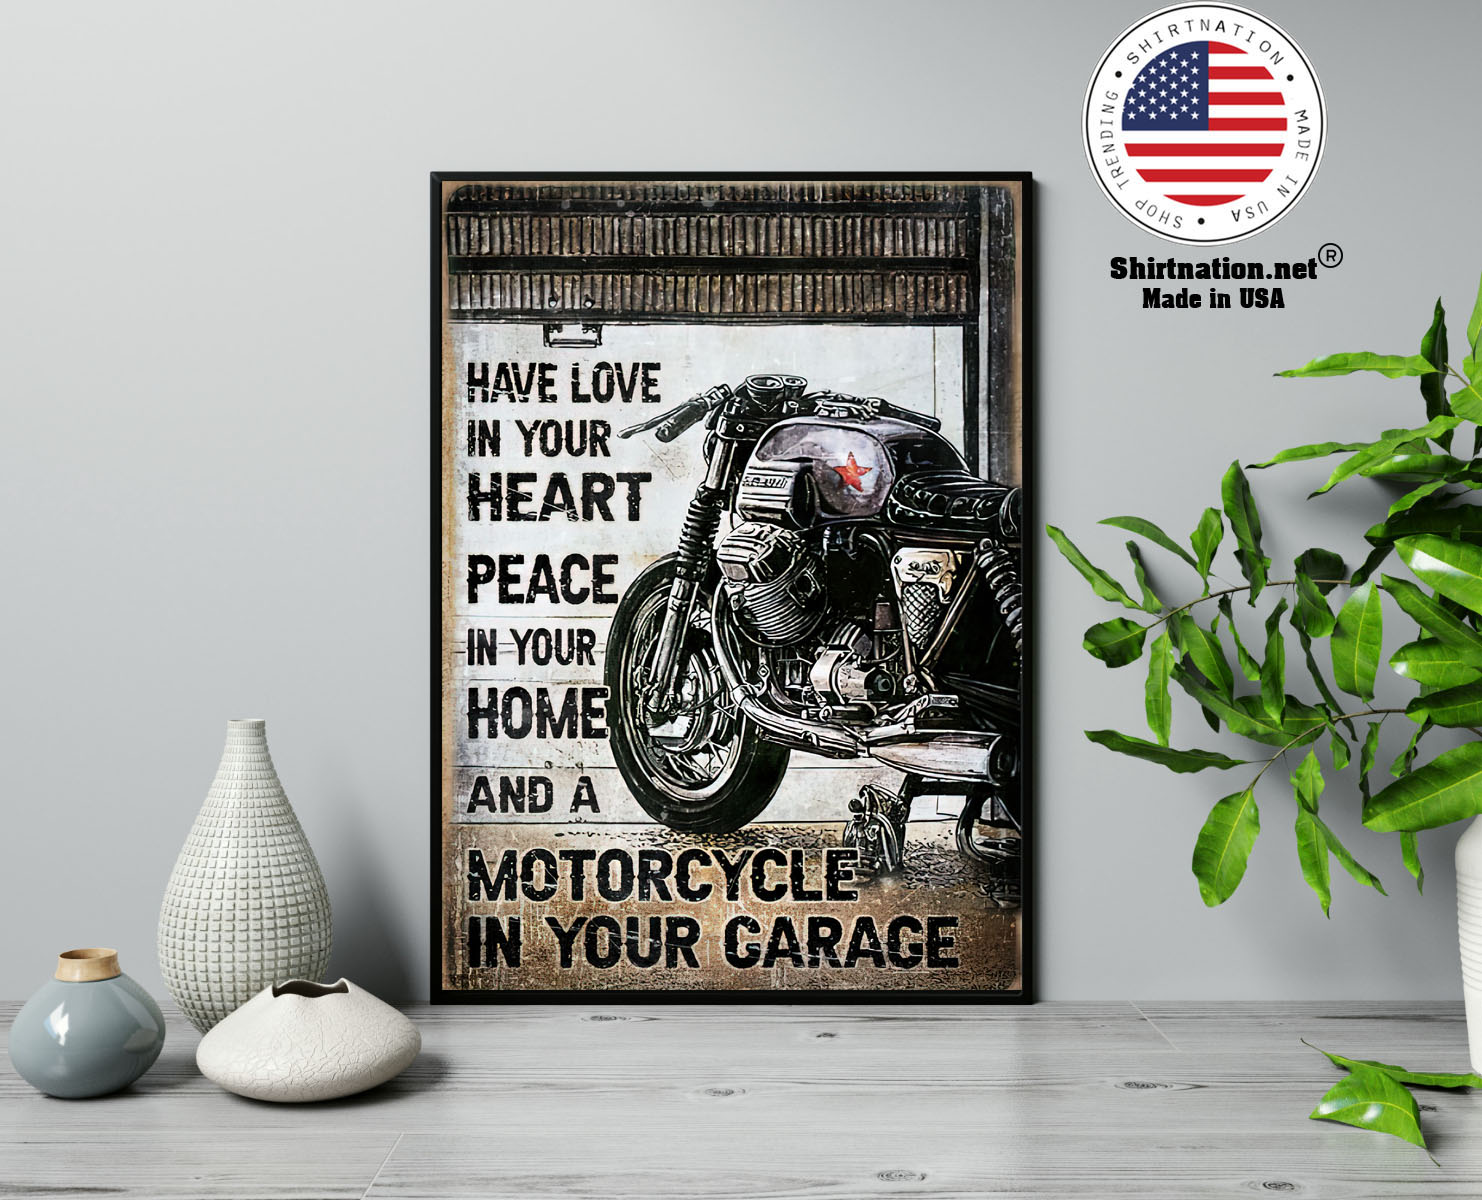 Have love in your heart peace in your home and a motorcycle in your garage poster 13